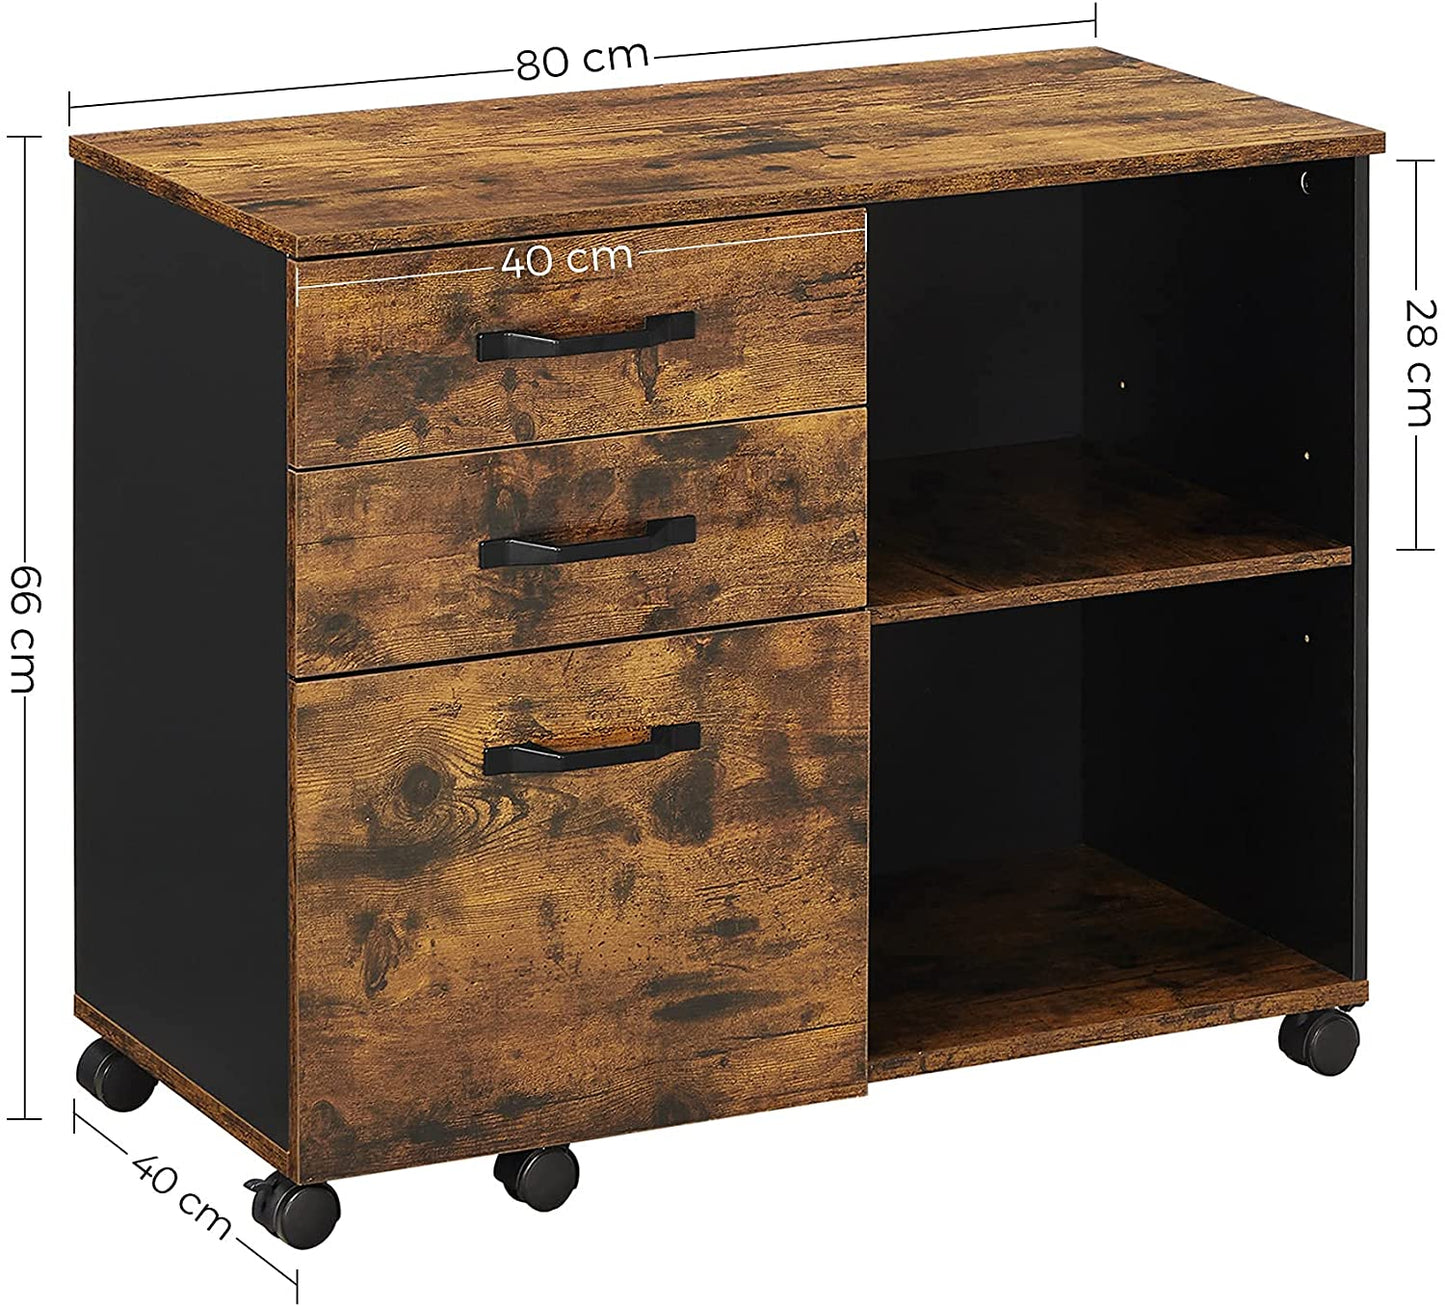 Nancy's Haystack Filing Cabinet - Rolling Container - On Wheels - 3 Drawers - Open Compartments - Industrial - Processed Wood - Metal - Brown - Black - 80 x 40 x 66 cm 